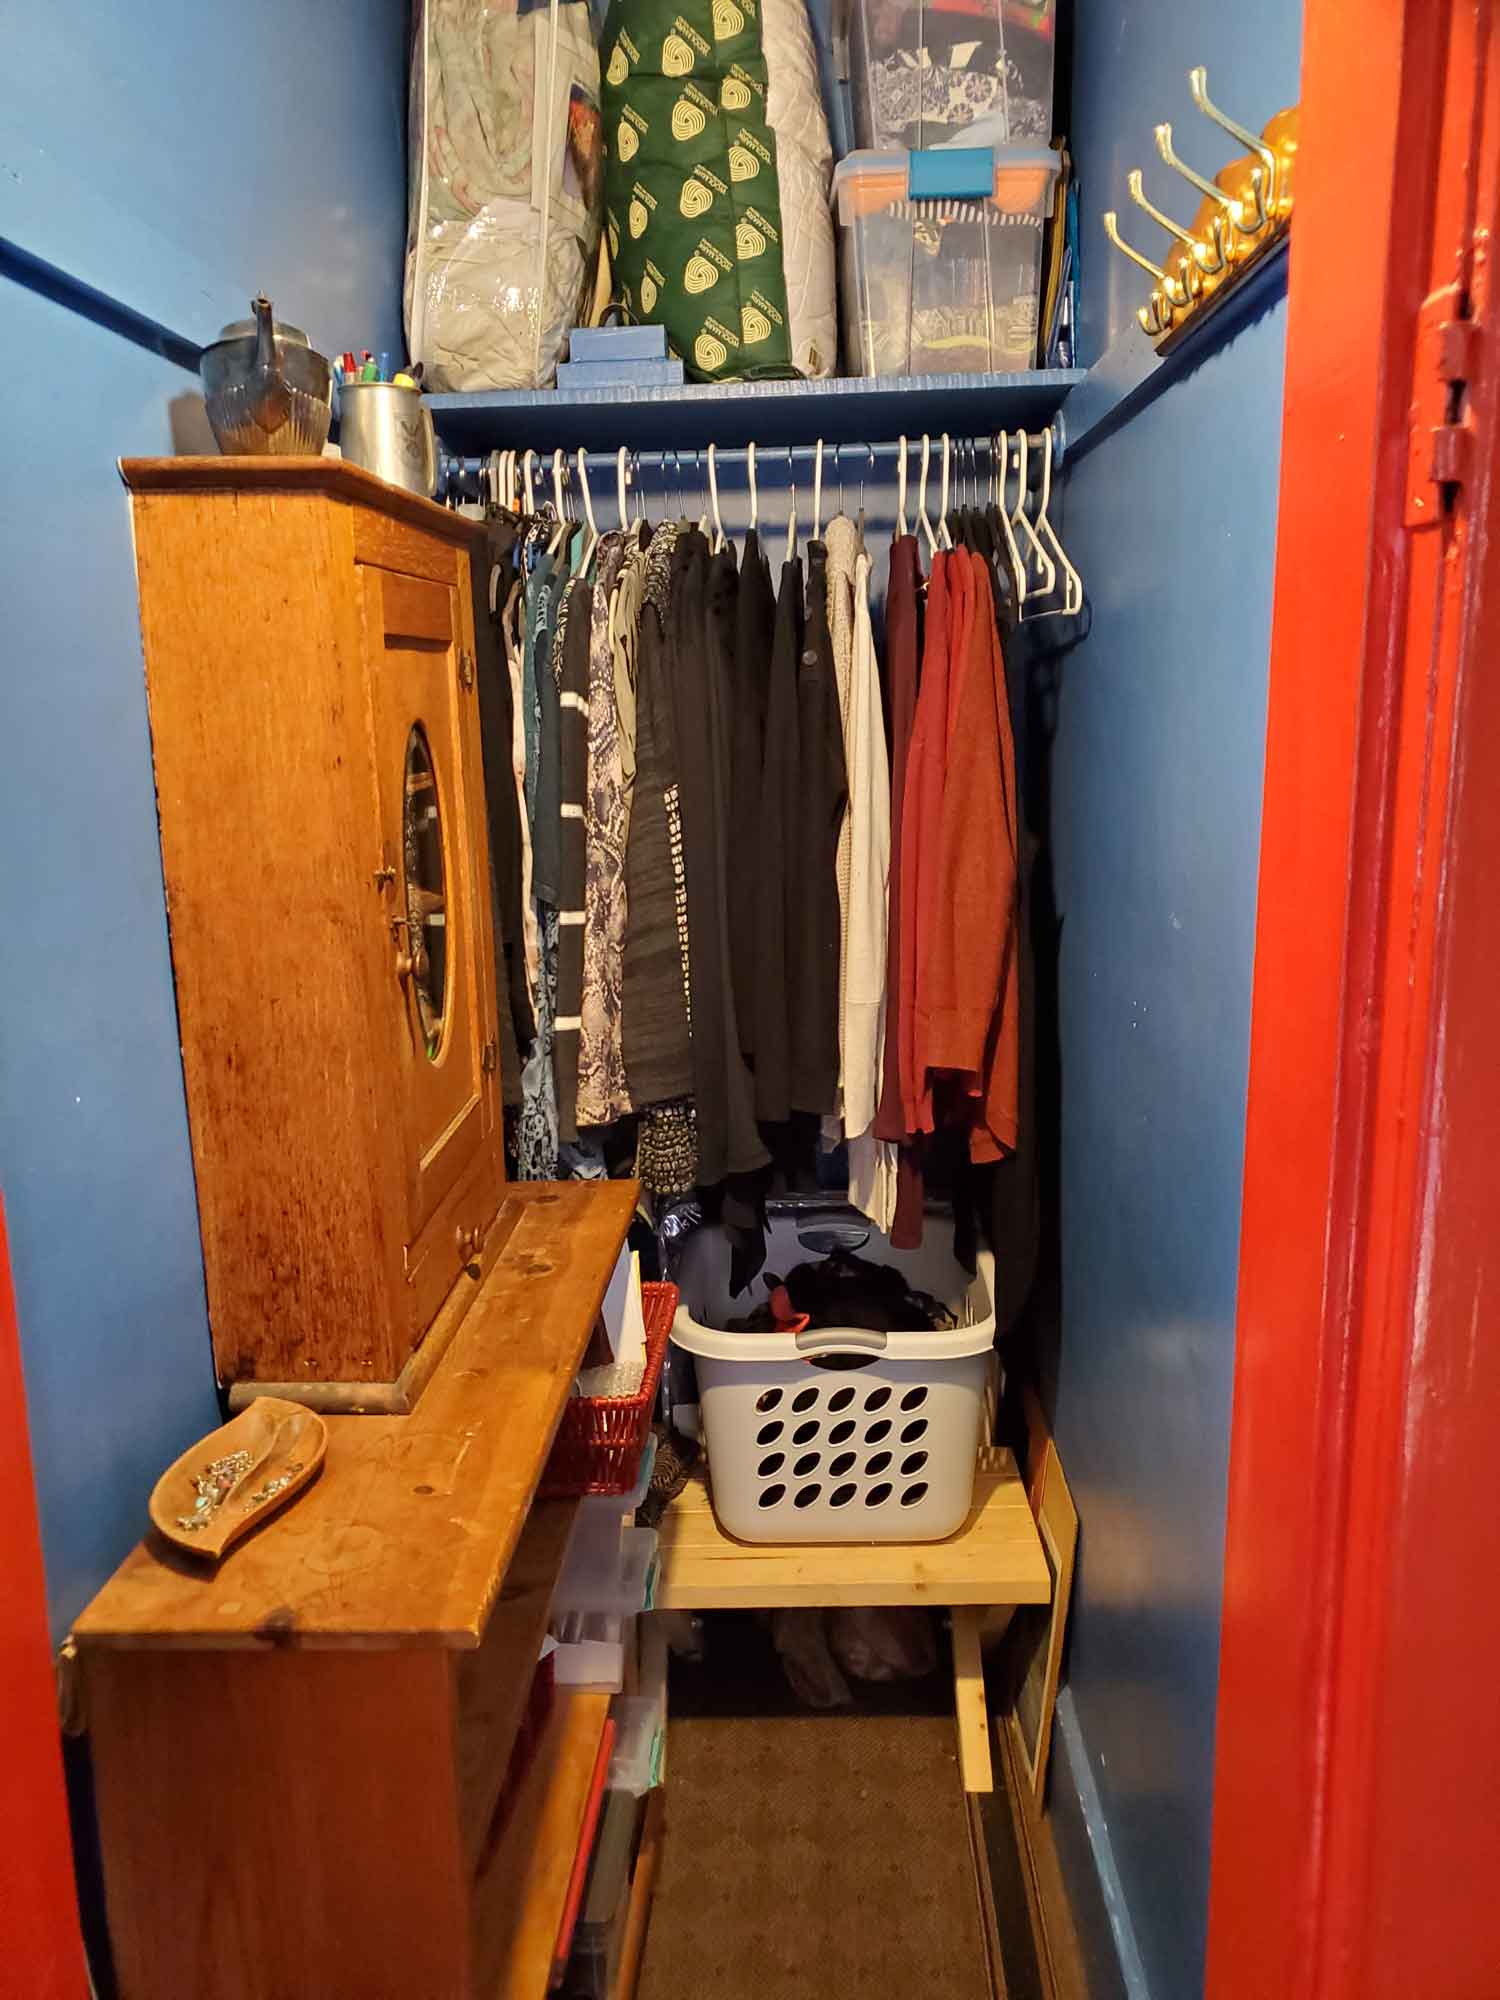 A better organized closet with shelving and cabinet added on the left